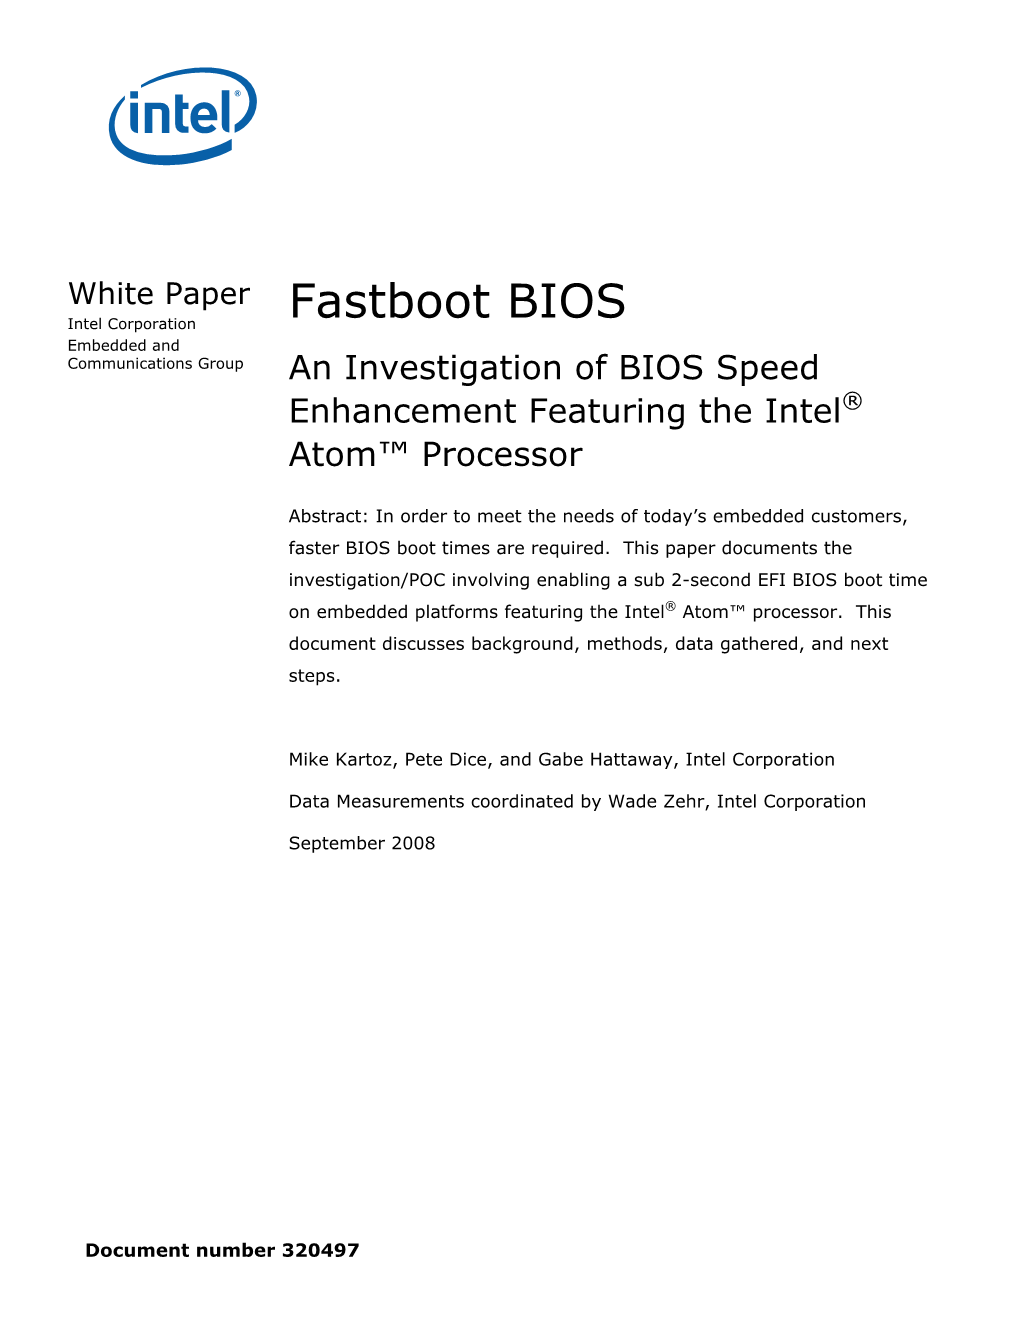 Fastboot BIOS Embedded and Communications Group an Investigation of BIOS Speed Enhancement Featuring the Intel® Atom™ Processor